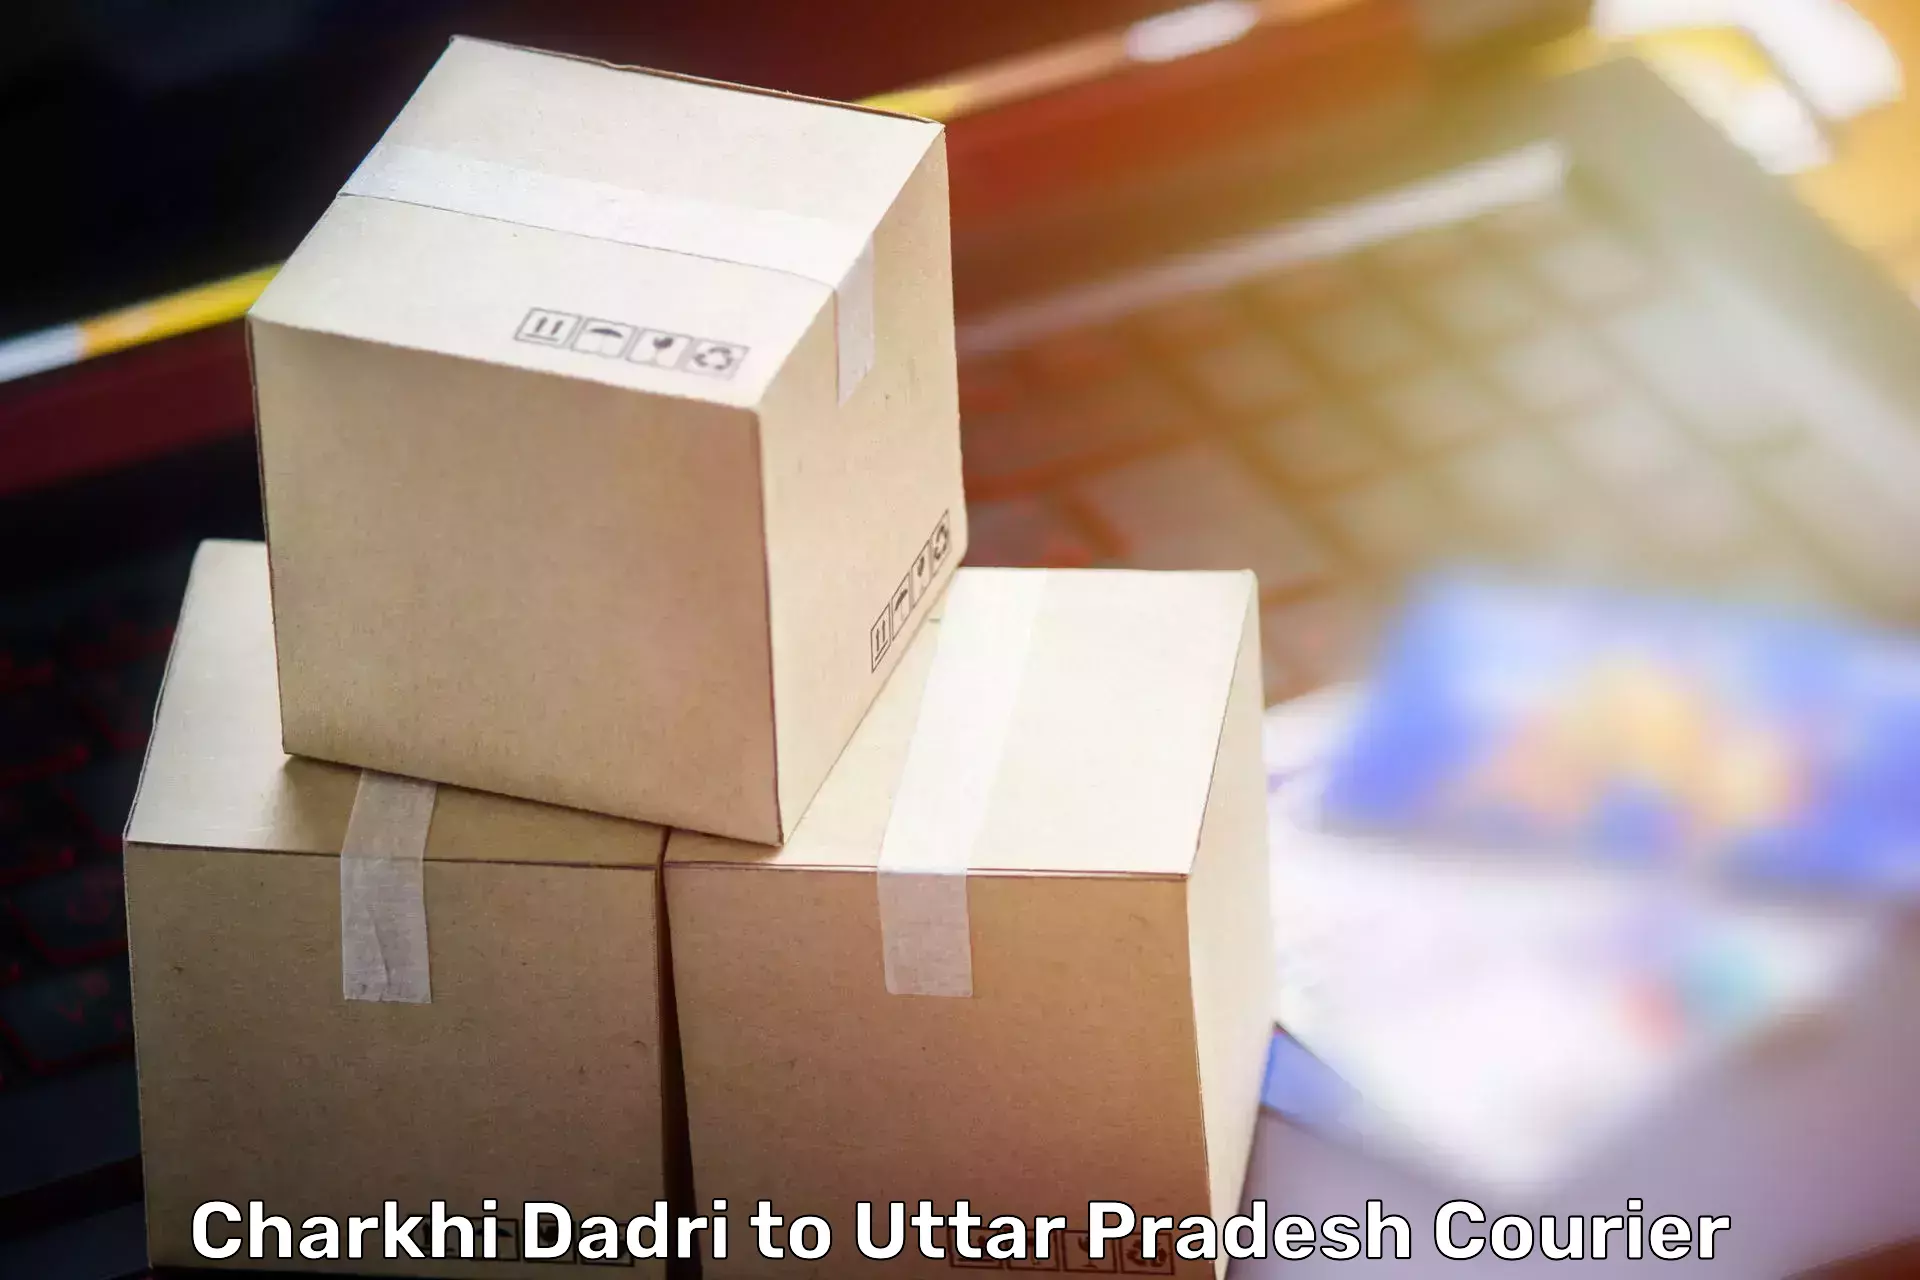 High-quality moving services Charkhi Dadri to IIIT Lucknow